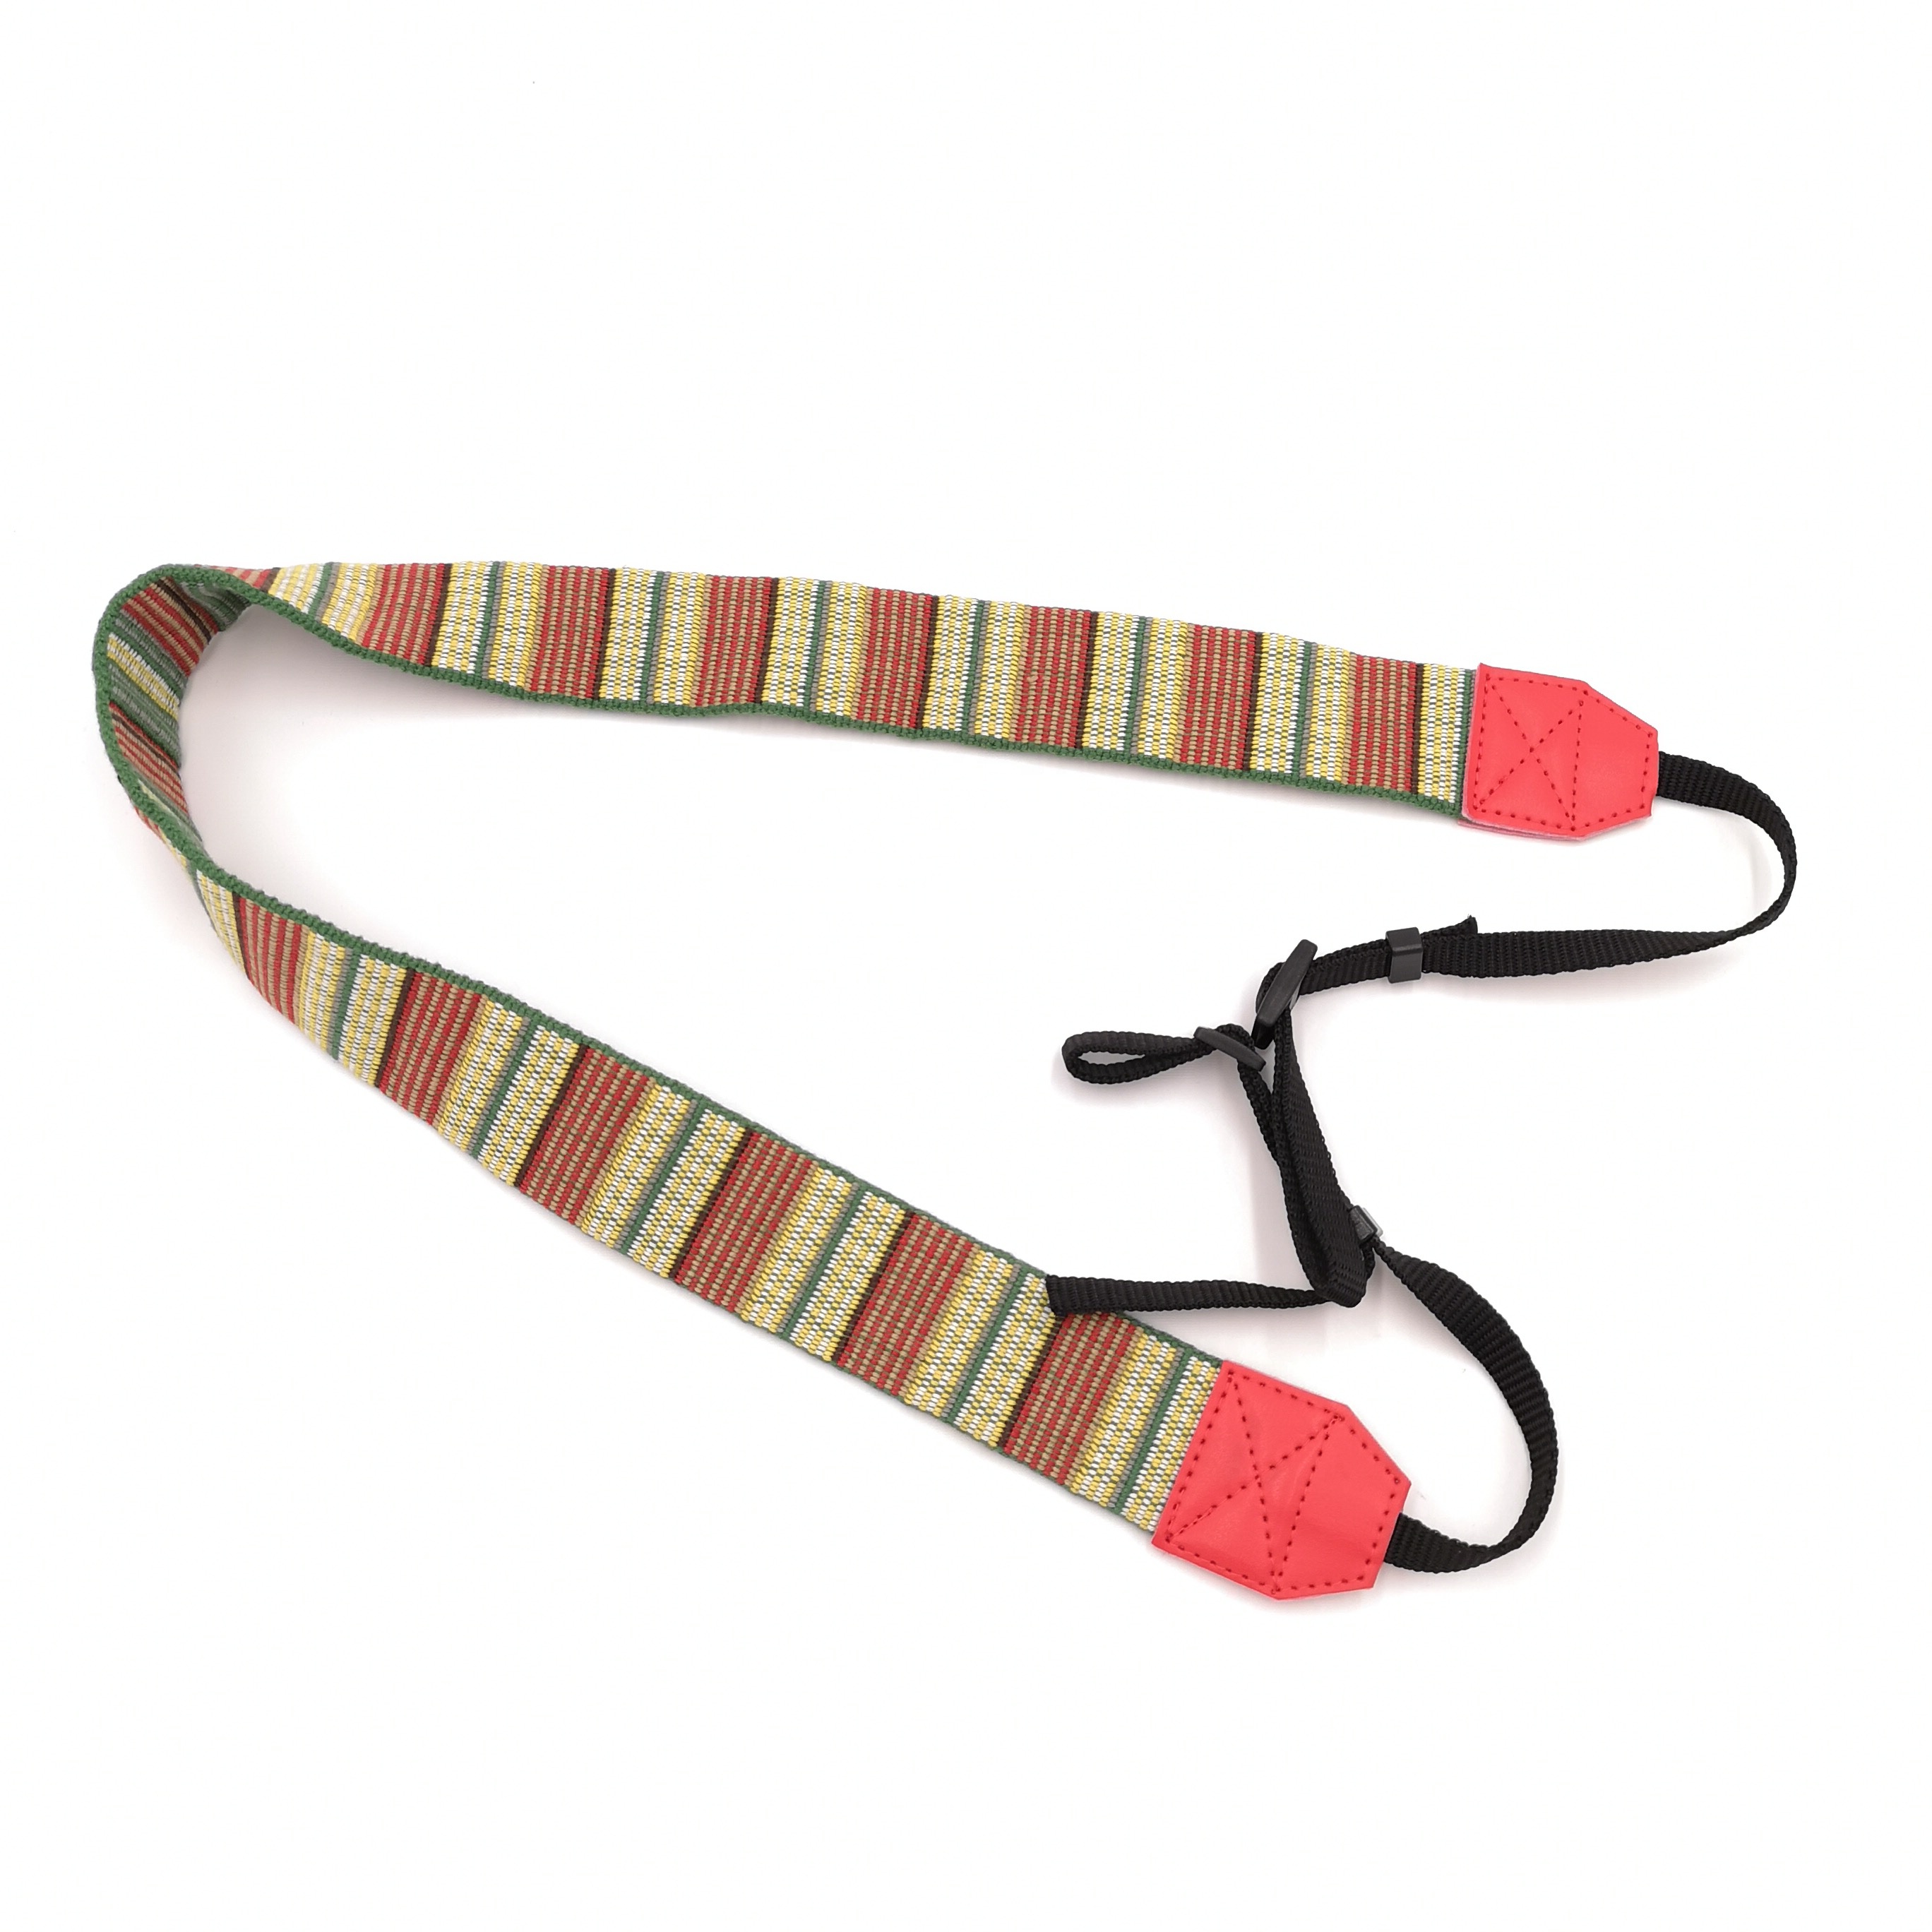 Excellent quality Lanyard Cord - Colorful durable camera strap knit lanyard – Bison